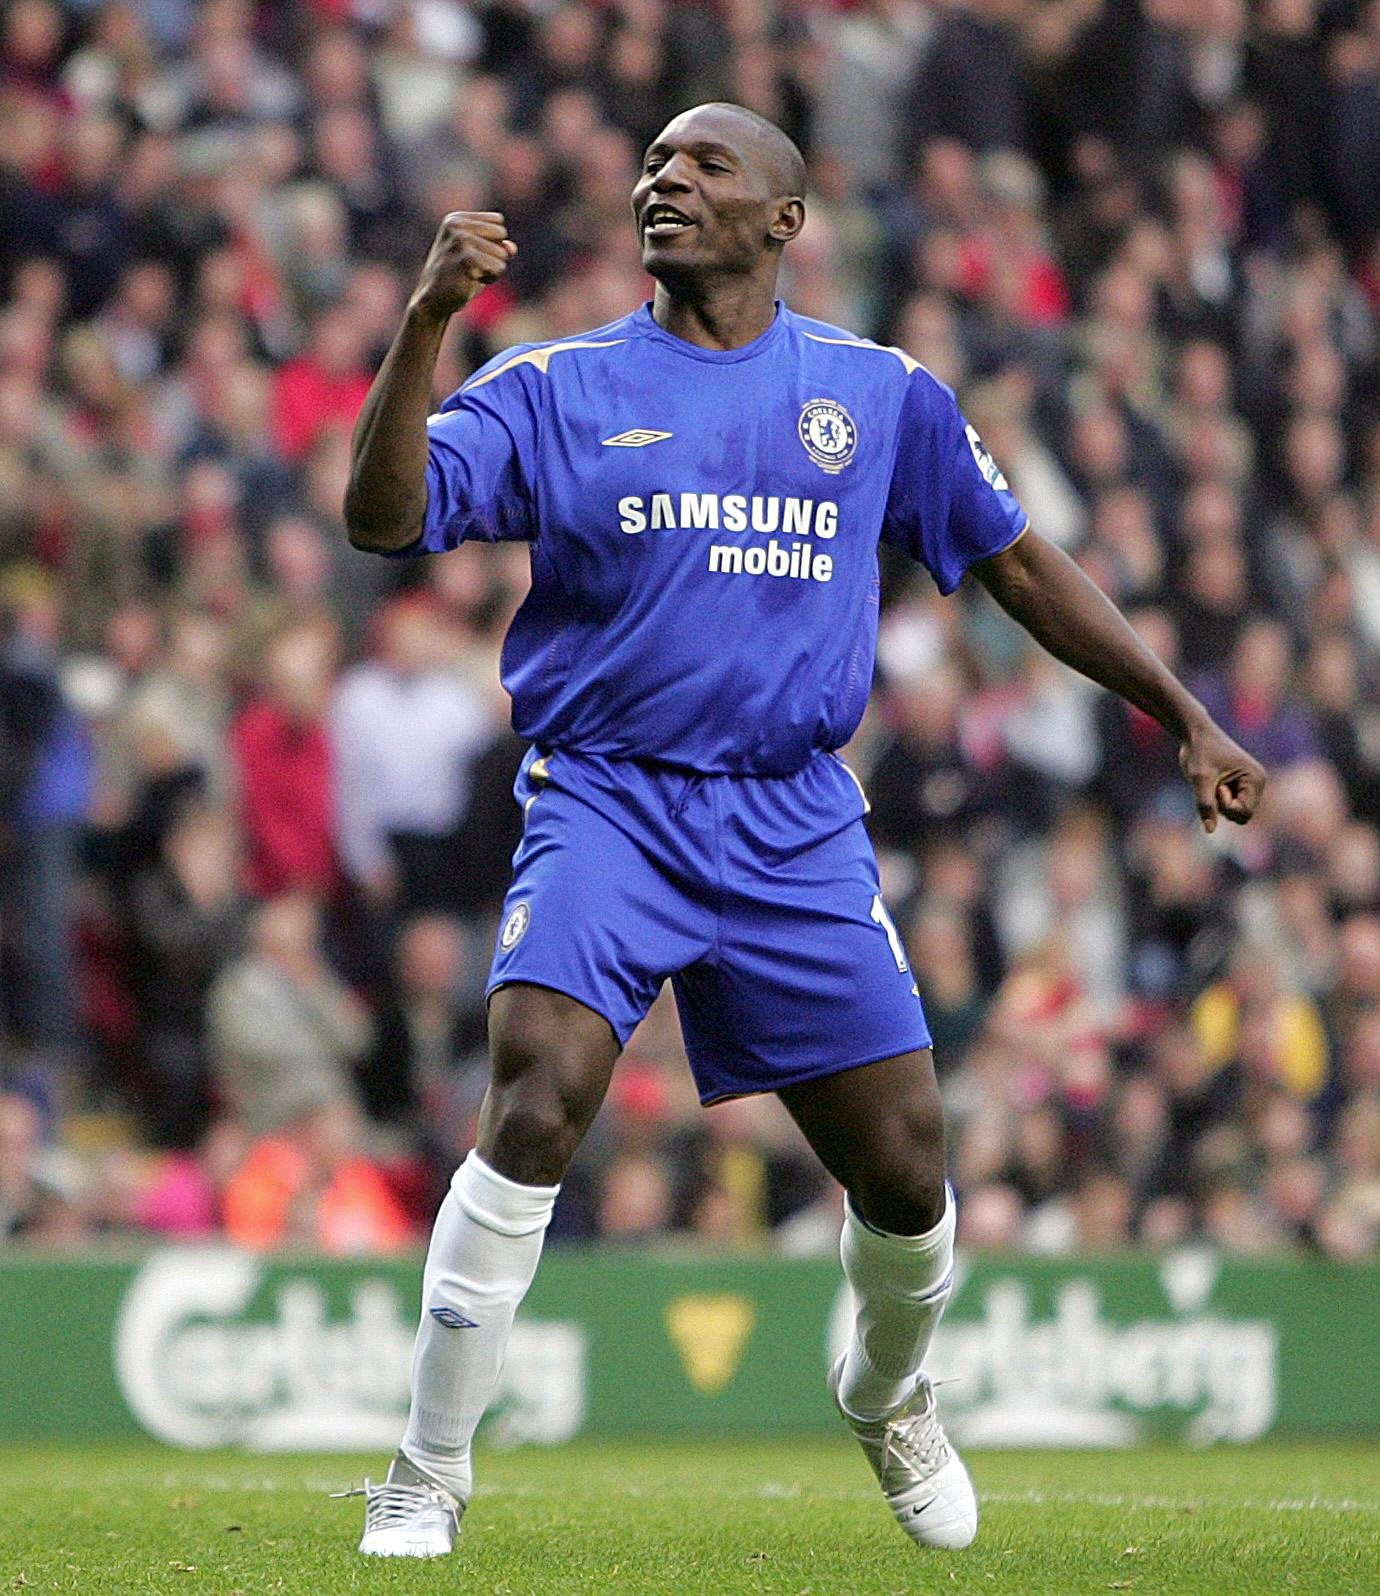 The Cameroon ace made 109 Chelsea appearances between 2003 and 2007